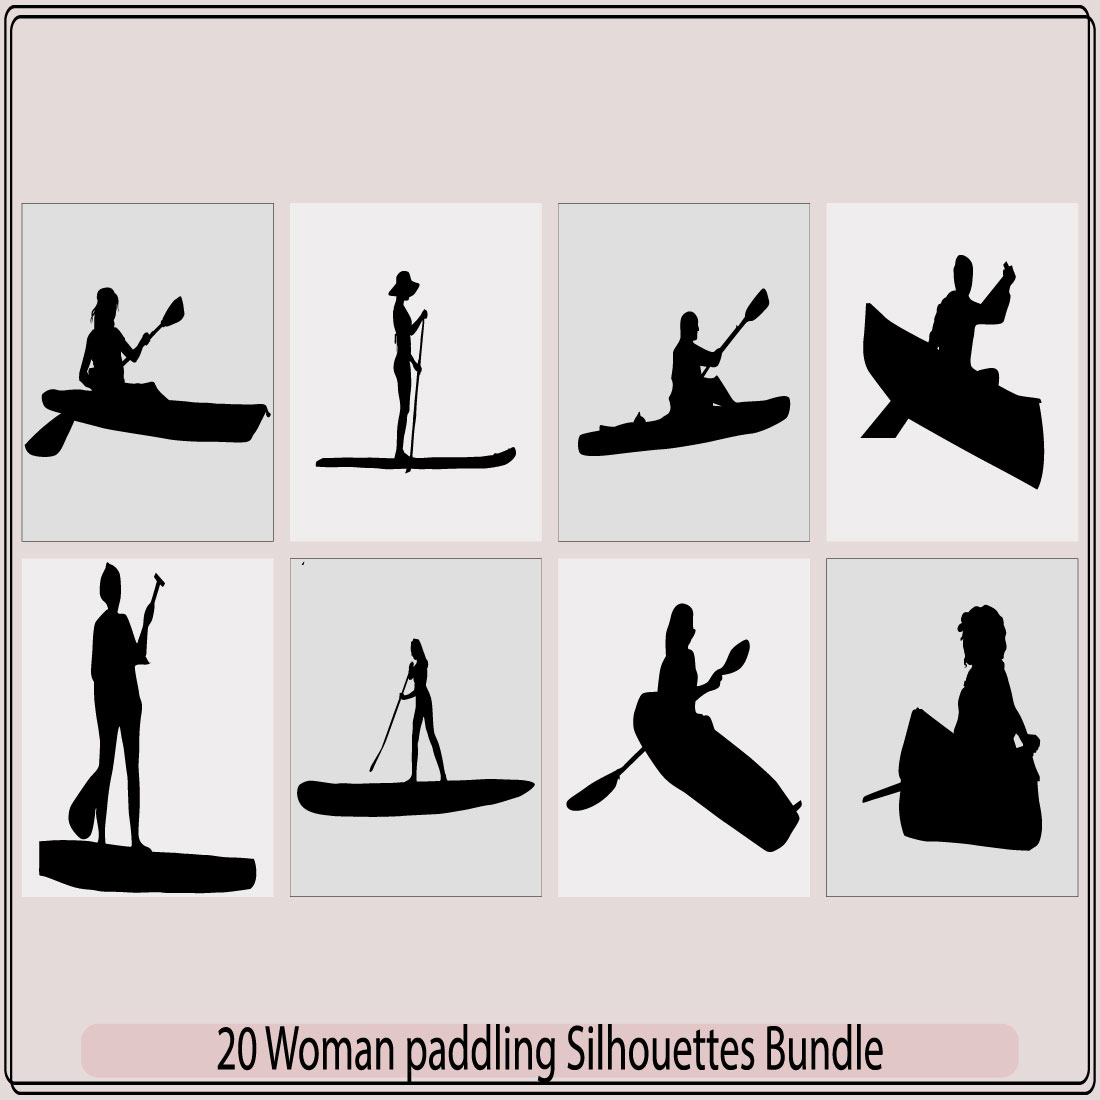 Stand Up paddle silhouette a woman is standing on a boat, Standup paddleboarding,Canoe paddle Silhouette,Woman posing with surfboard and paddle,Man and woman standing on the paddleboards preview image.